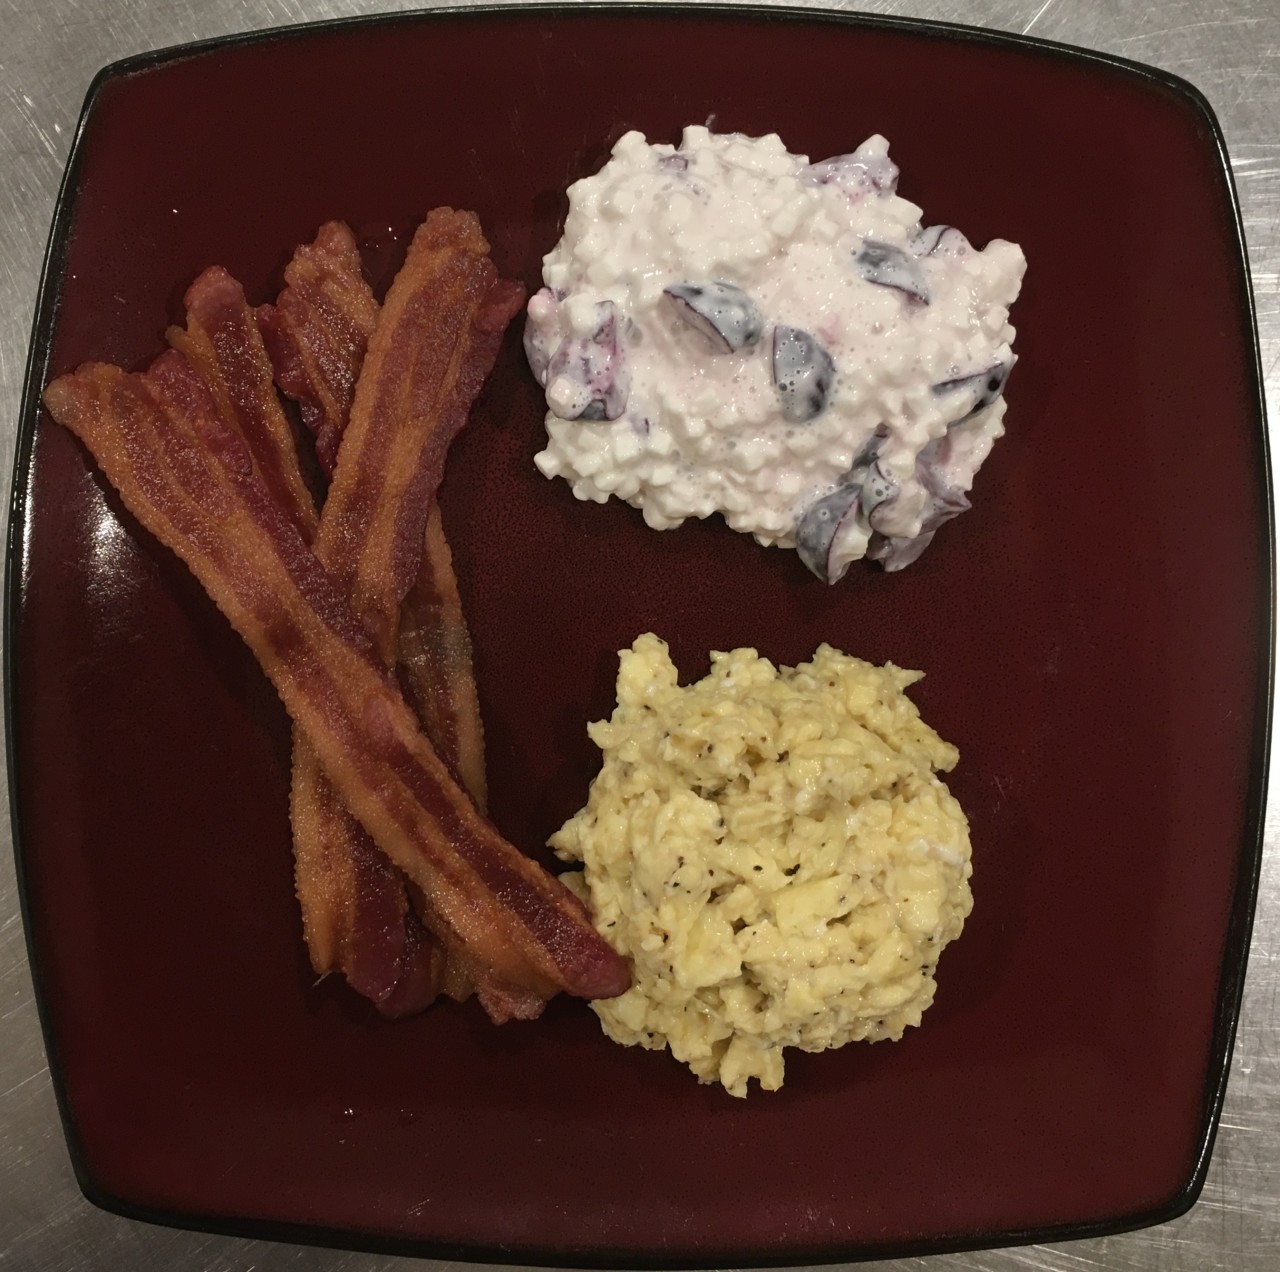 <a class="bx-tag" rel="tag" href="https://streetloc.com/view-channel-profile/whatsforbreakfast"><s>#</s><b>whatsforbreakfast</b></a> Butter Scrambled Eggs, Nitrate-Free Bacon, and Cherries with Cottage Cheese